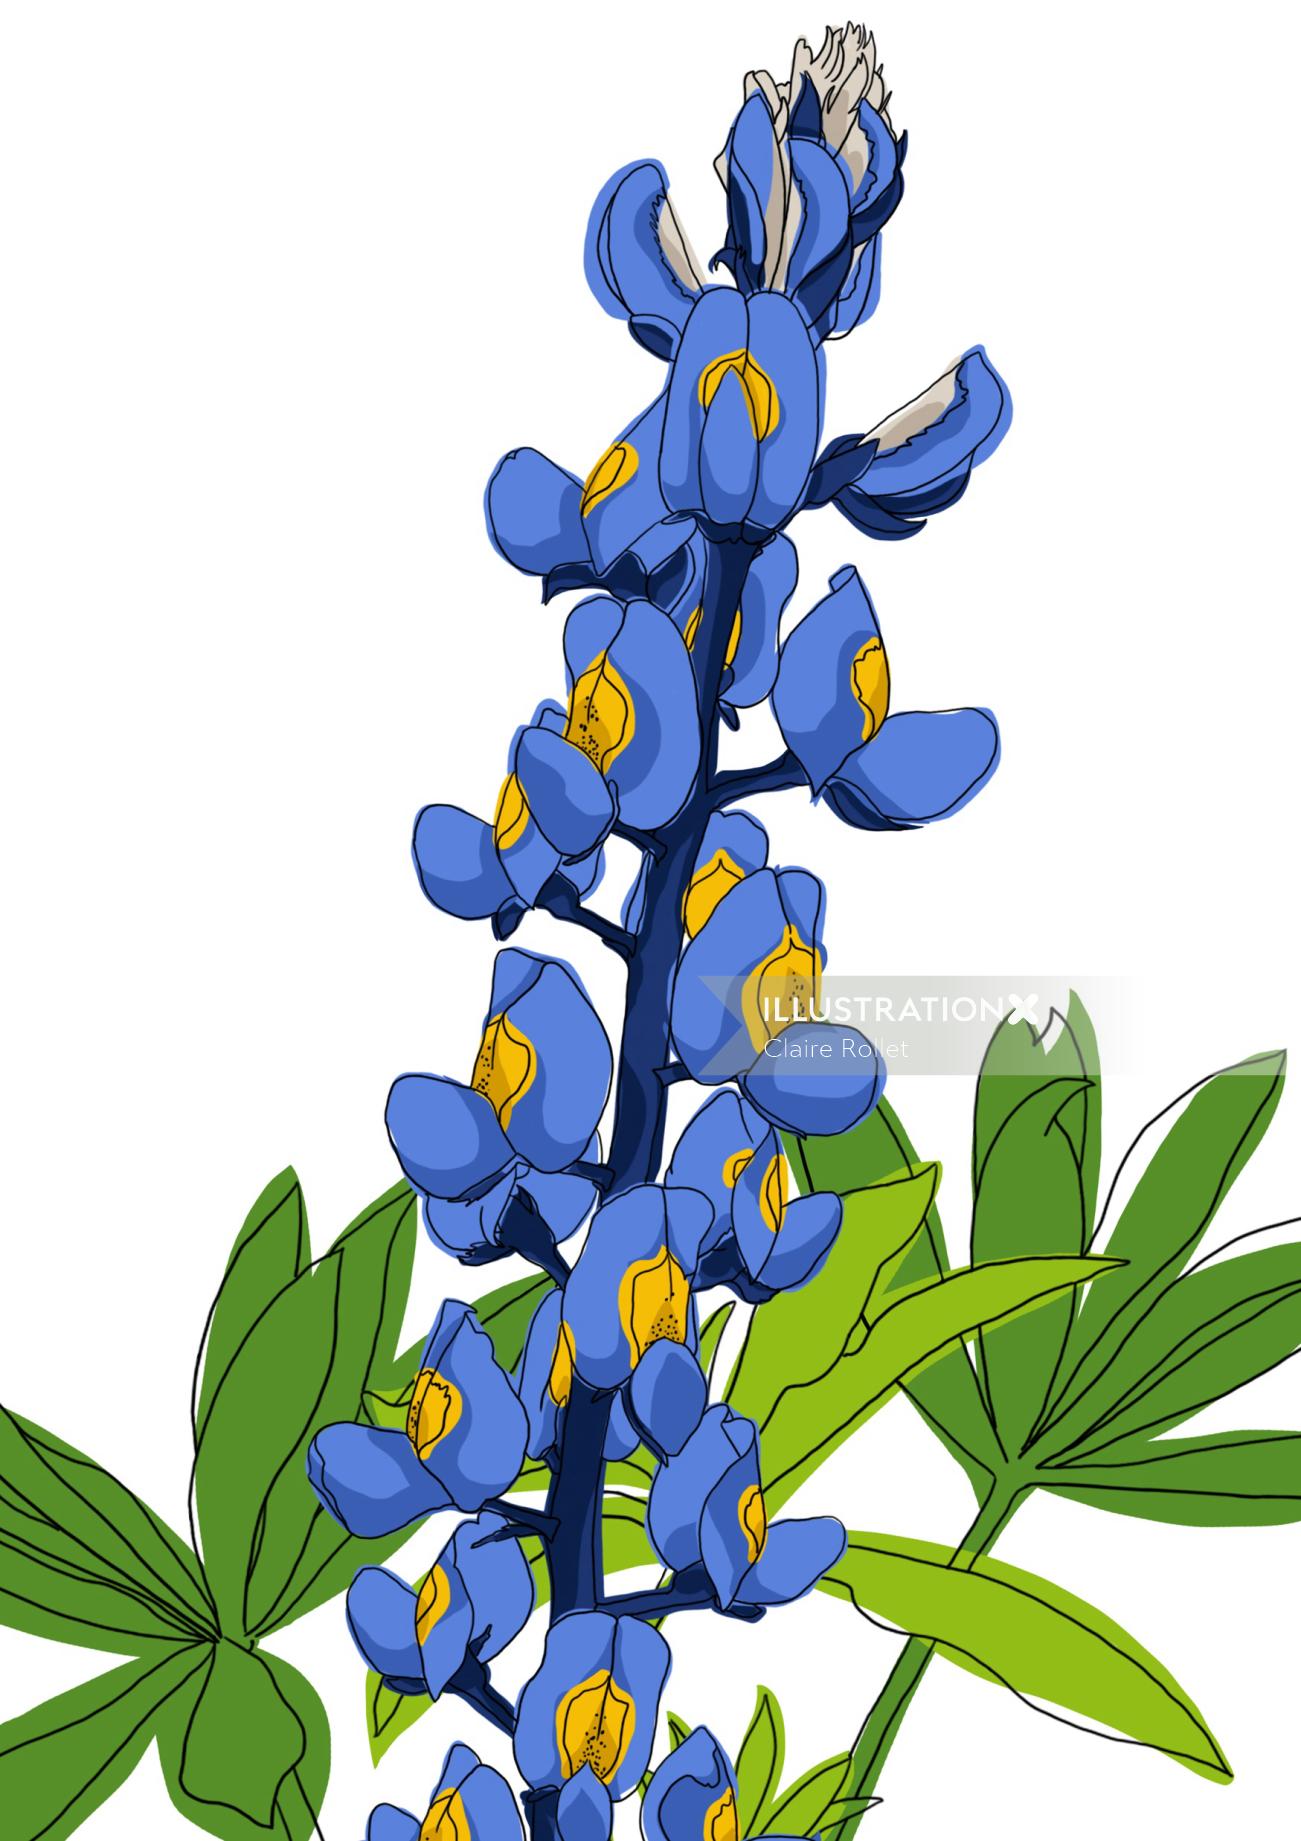 illustrated bluebonnet state flower of Texas by Claire Rollet